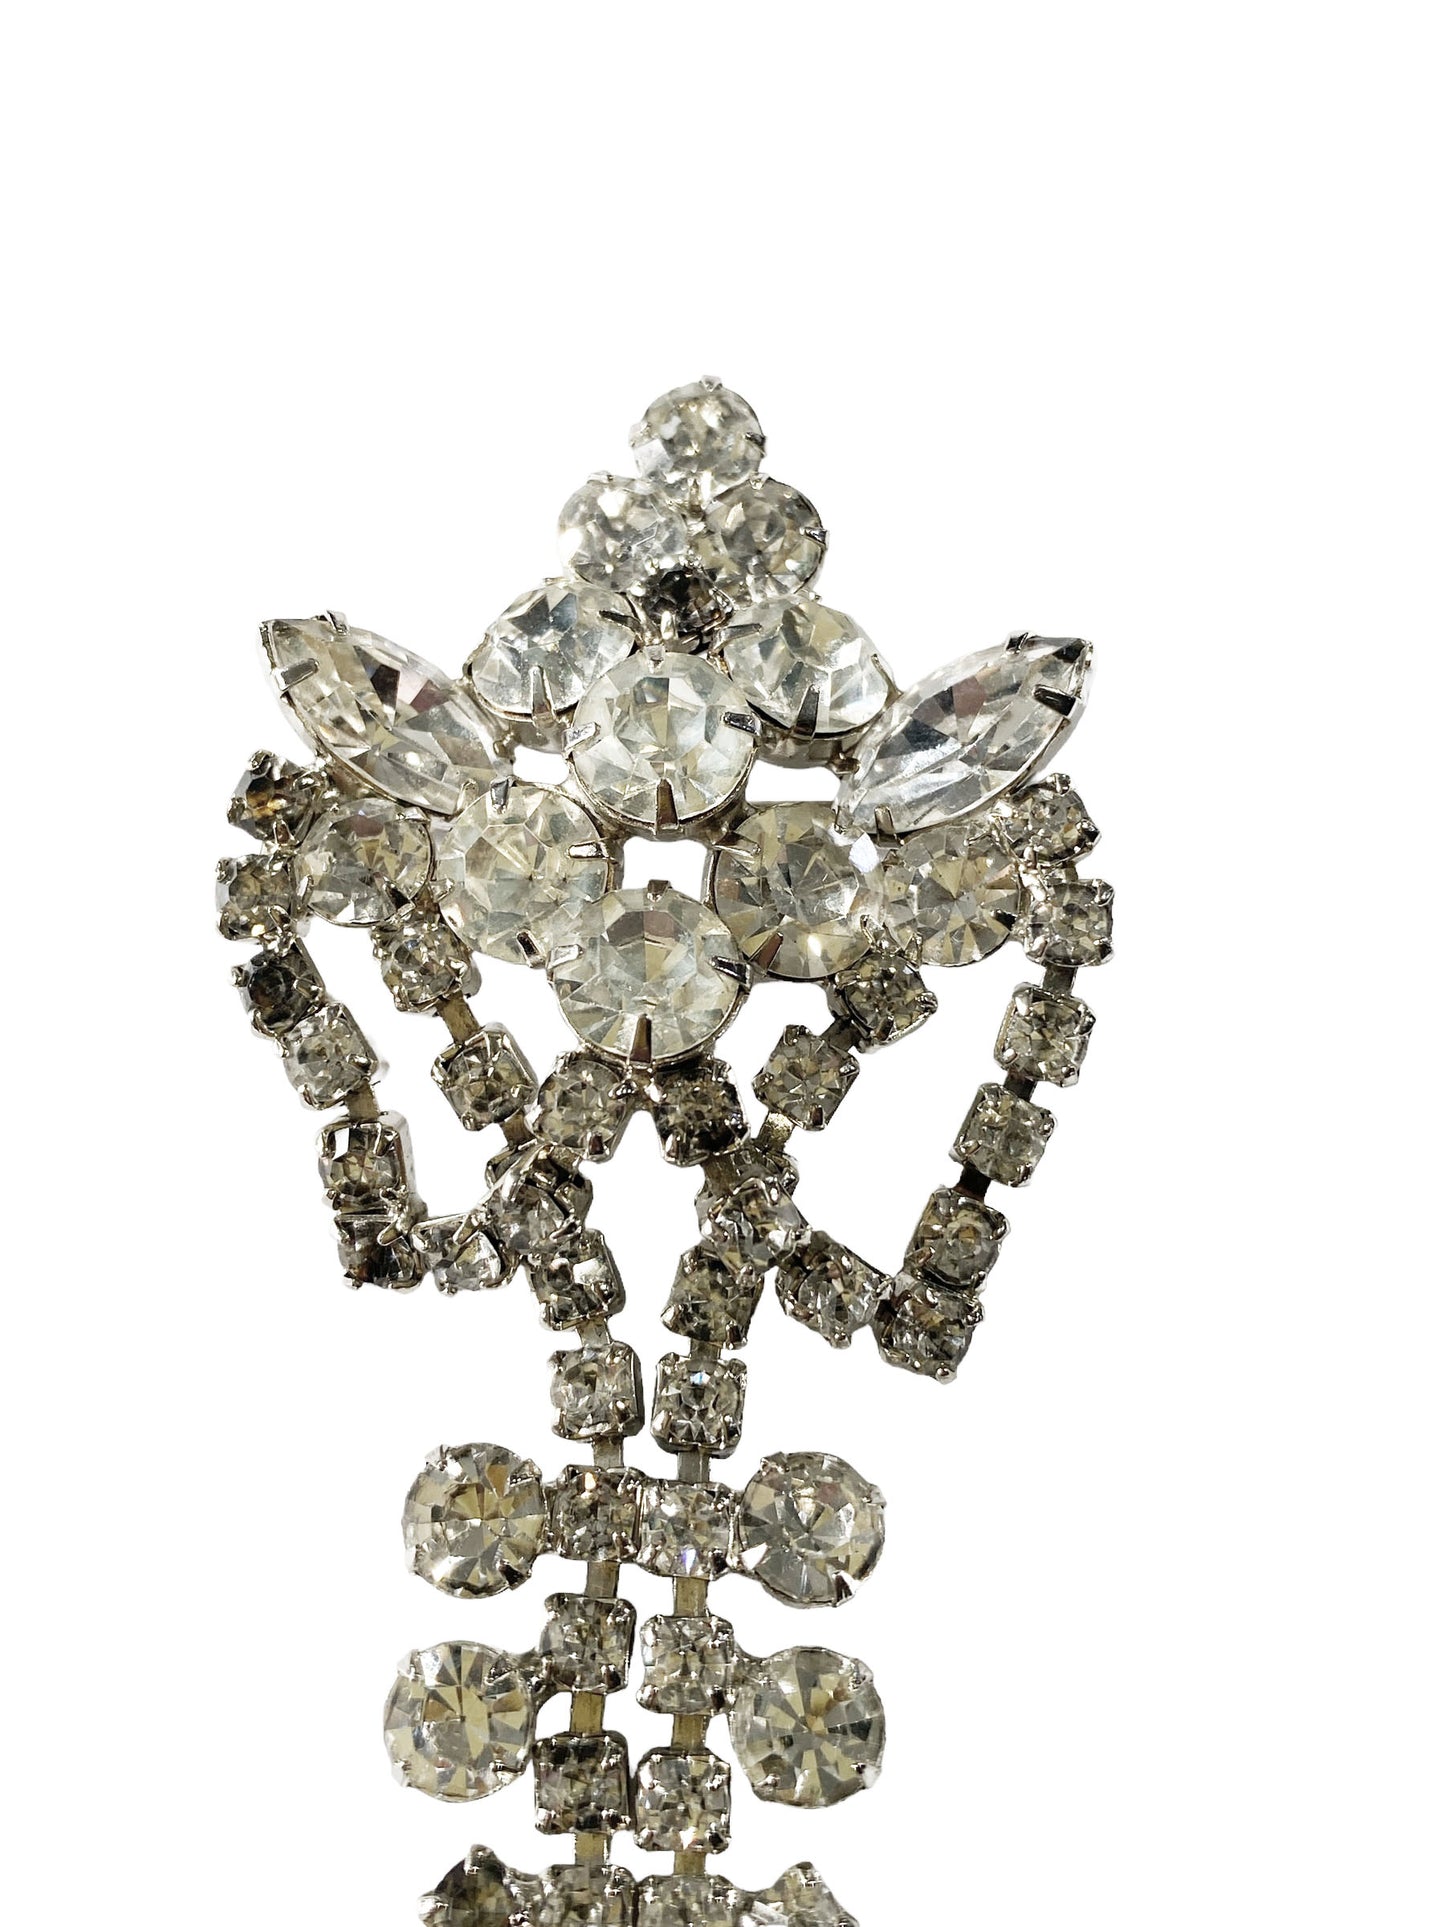 #71472 Vintage Clear Rhinestone Brooch Pin Costume Jewelry Silver Toned 3.5" H